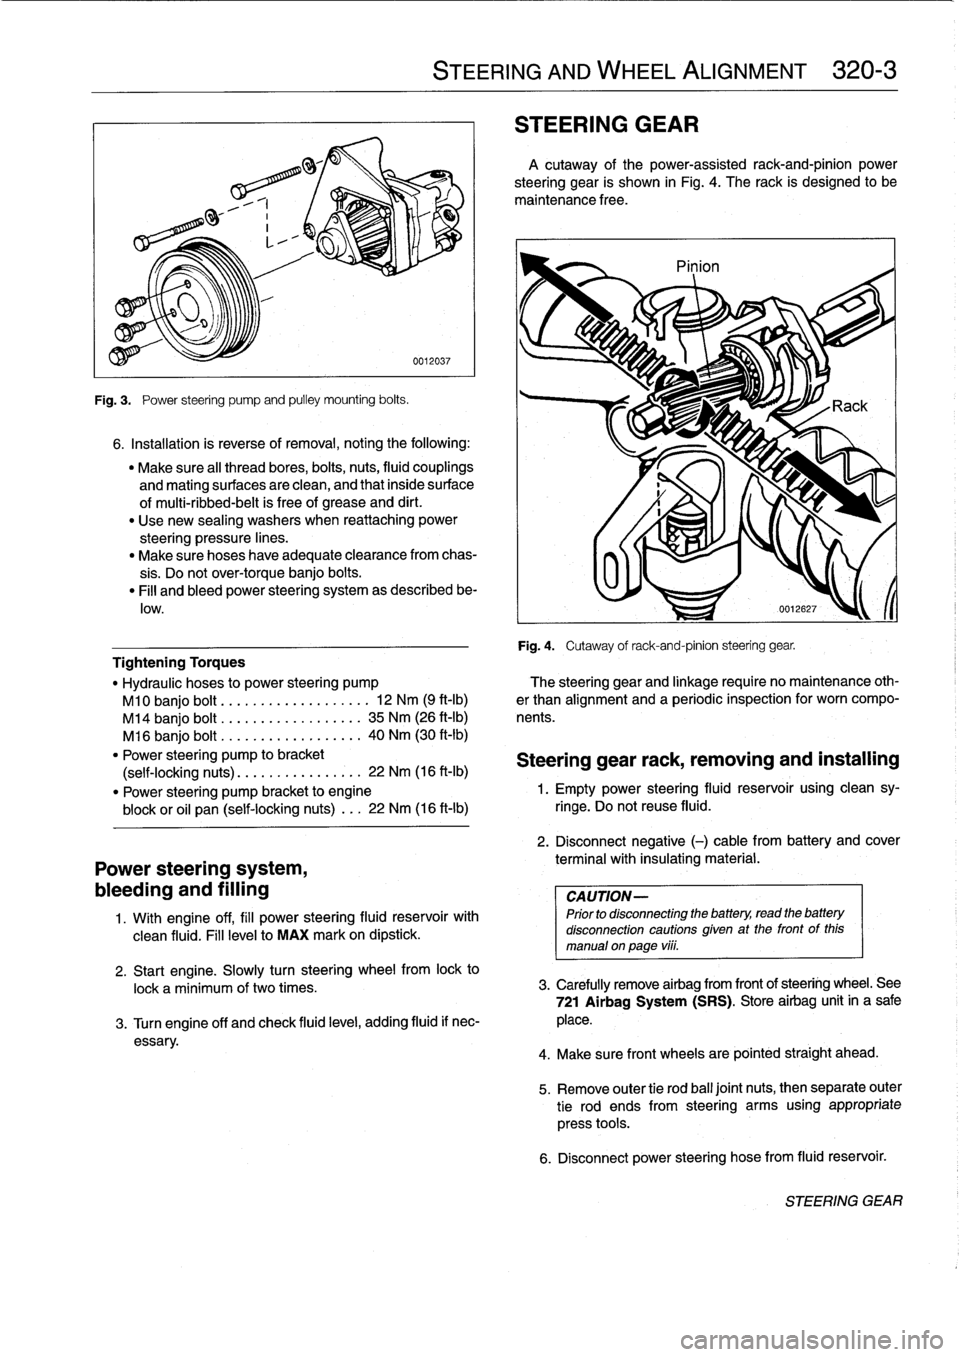 BMW 325i 1994 E36 Workshop Manual 
Fig
.
3
.

	

Power
steering
pump
and
pulley
mounting
bolts
.

6
.
Installation
is
reverse
of
removal,
noting
the
following
:

"
Make
sure
al¡
thread
bores,
bolts,
nuts,
fluid
couplings

and
mating
